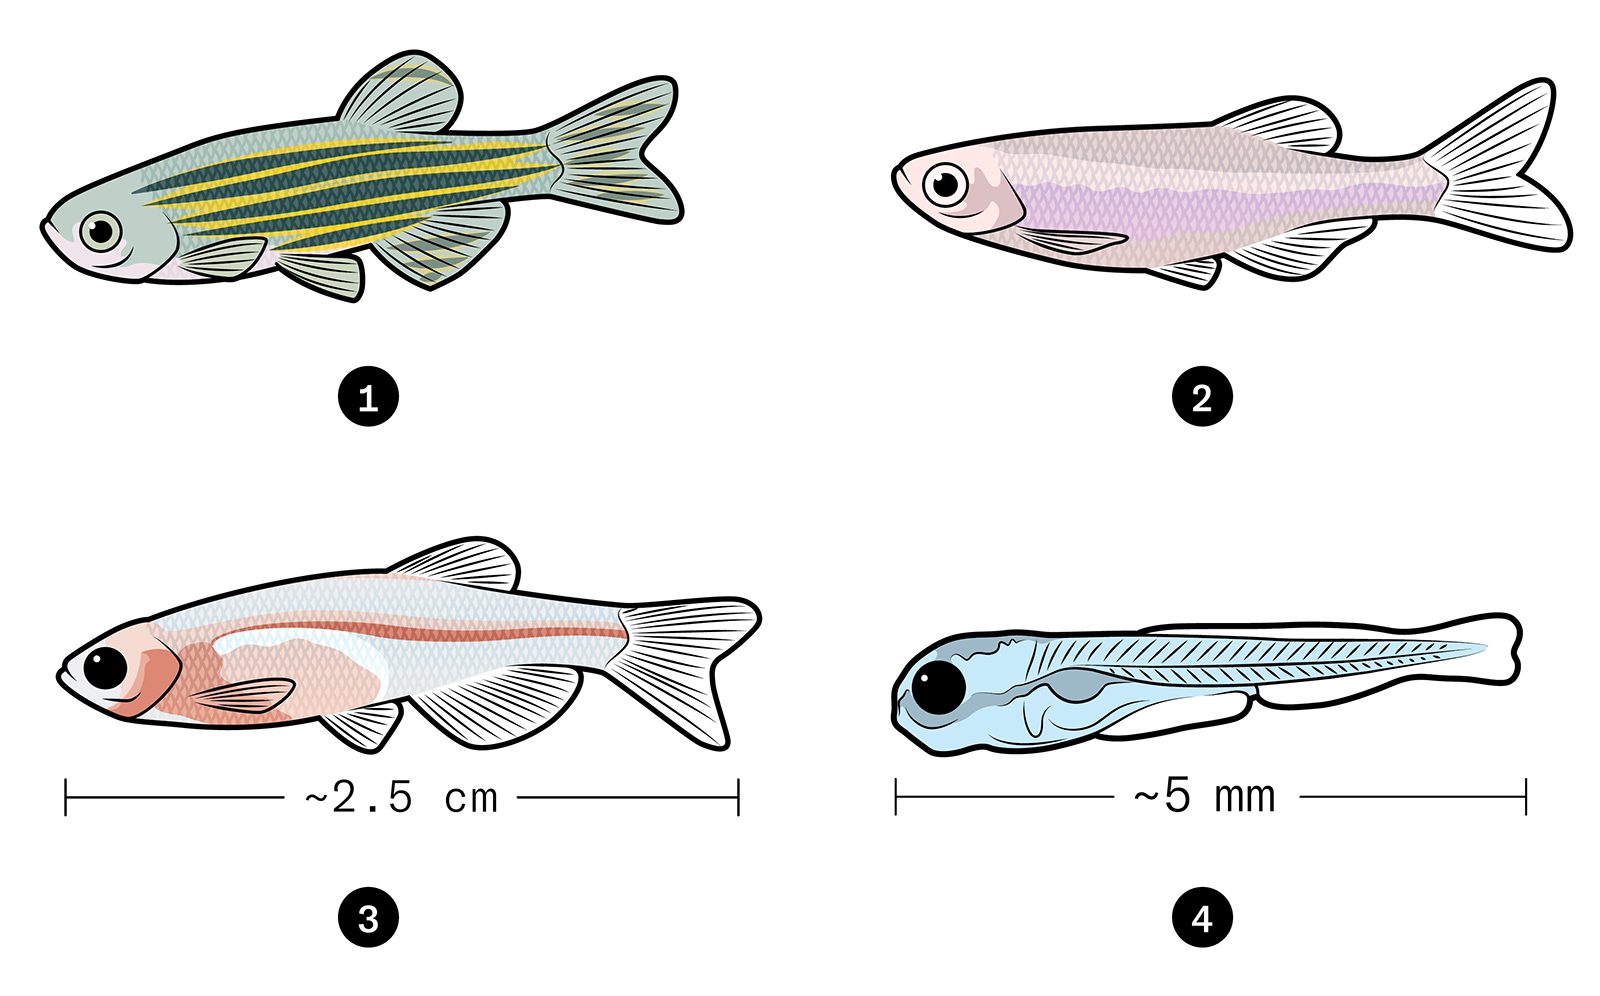 Illustration of four fish with different pigments: 1. Fish with green and yellow stripes. 2. Light pink-coloured fish. 3. Fish with dark orange-red colours around the head and upper belly and a streak in the centre from head to tail, measuring ~2.5 cm. 4. Light blue-coloured larval fish measuring ~5 mm.